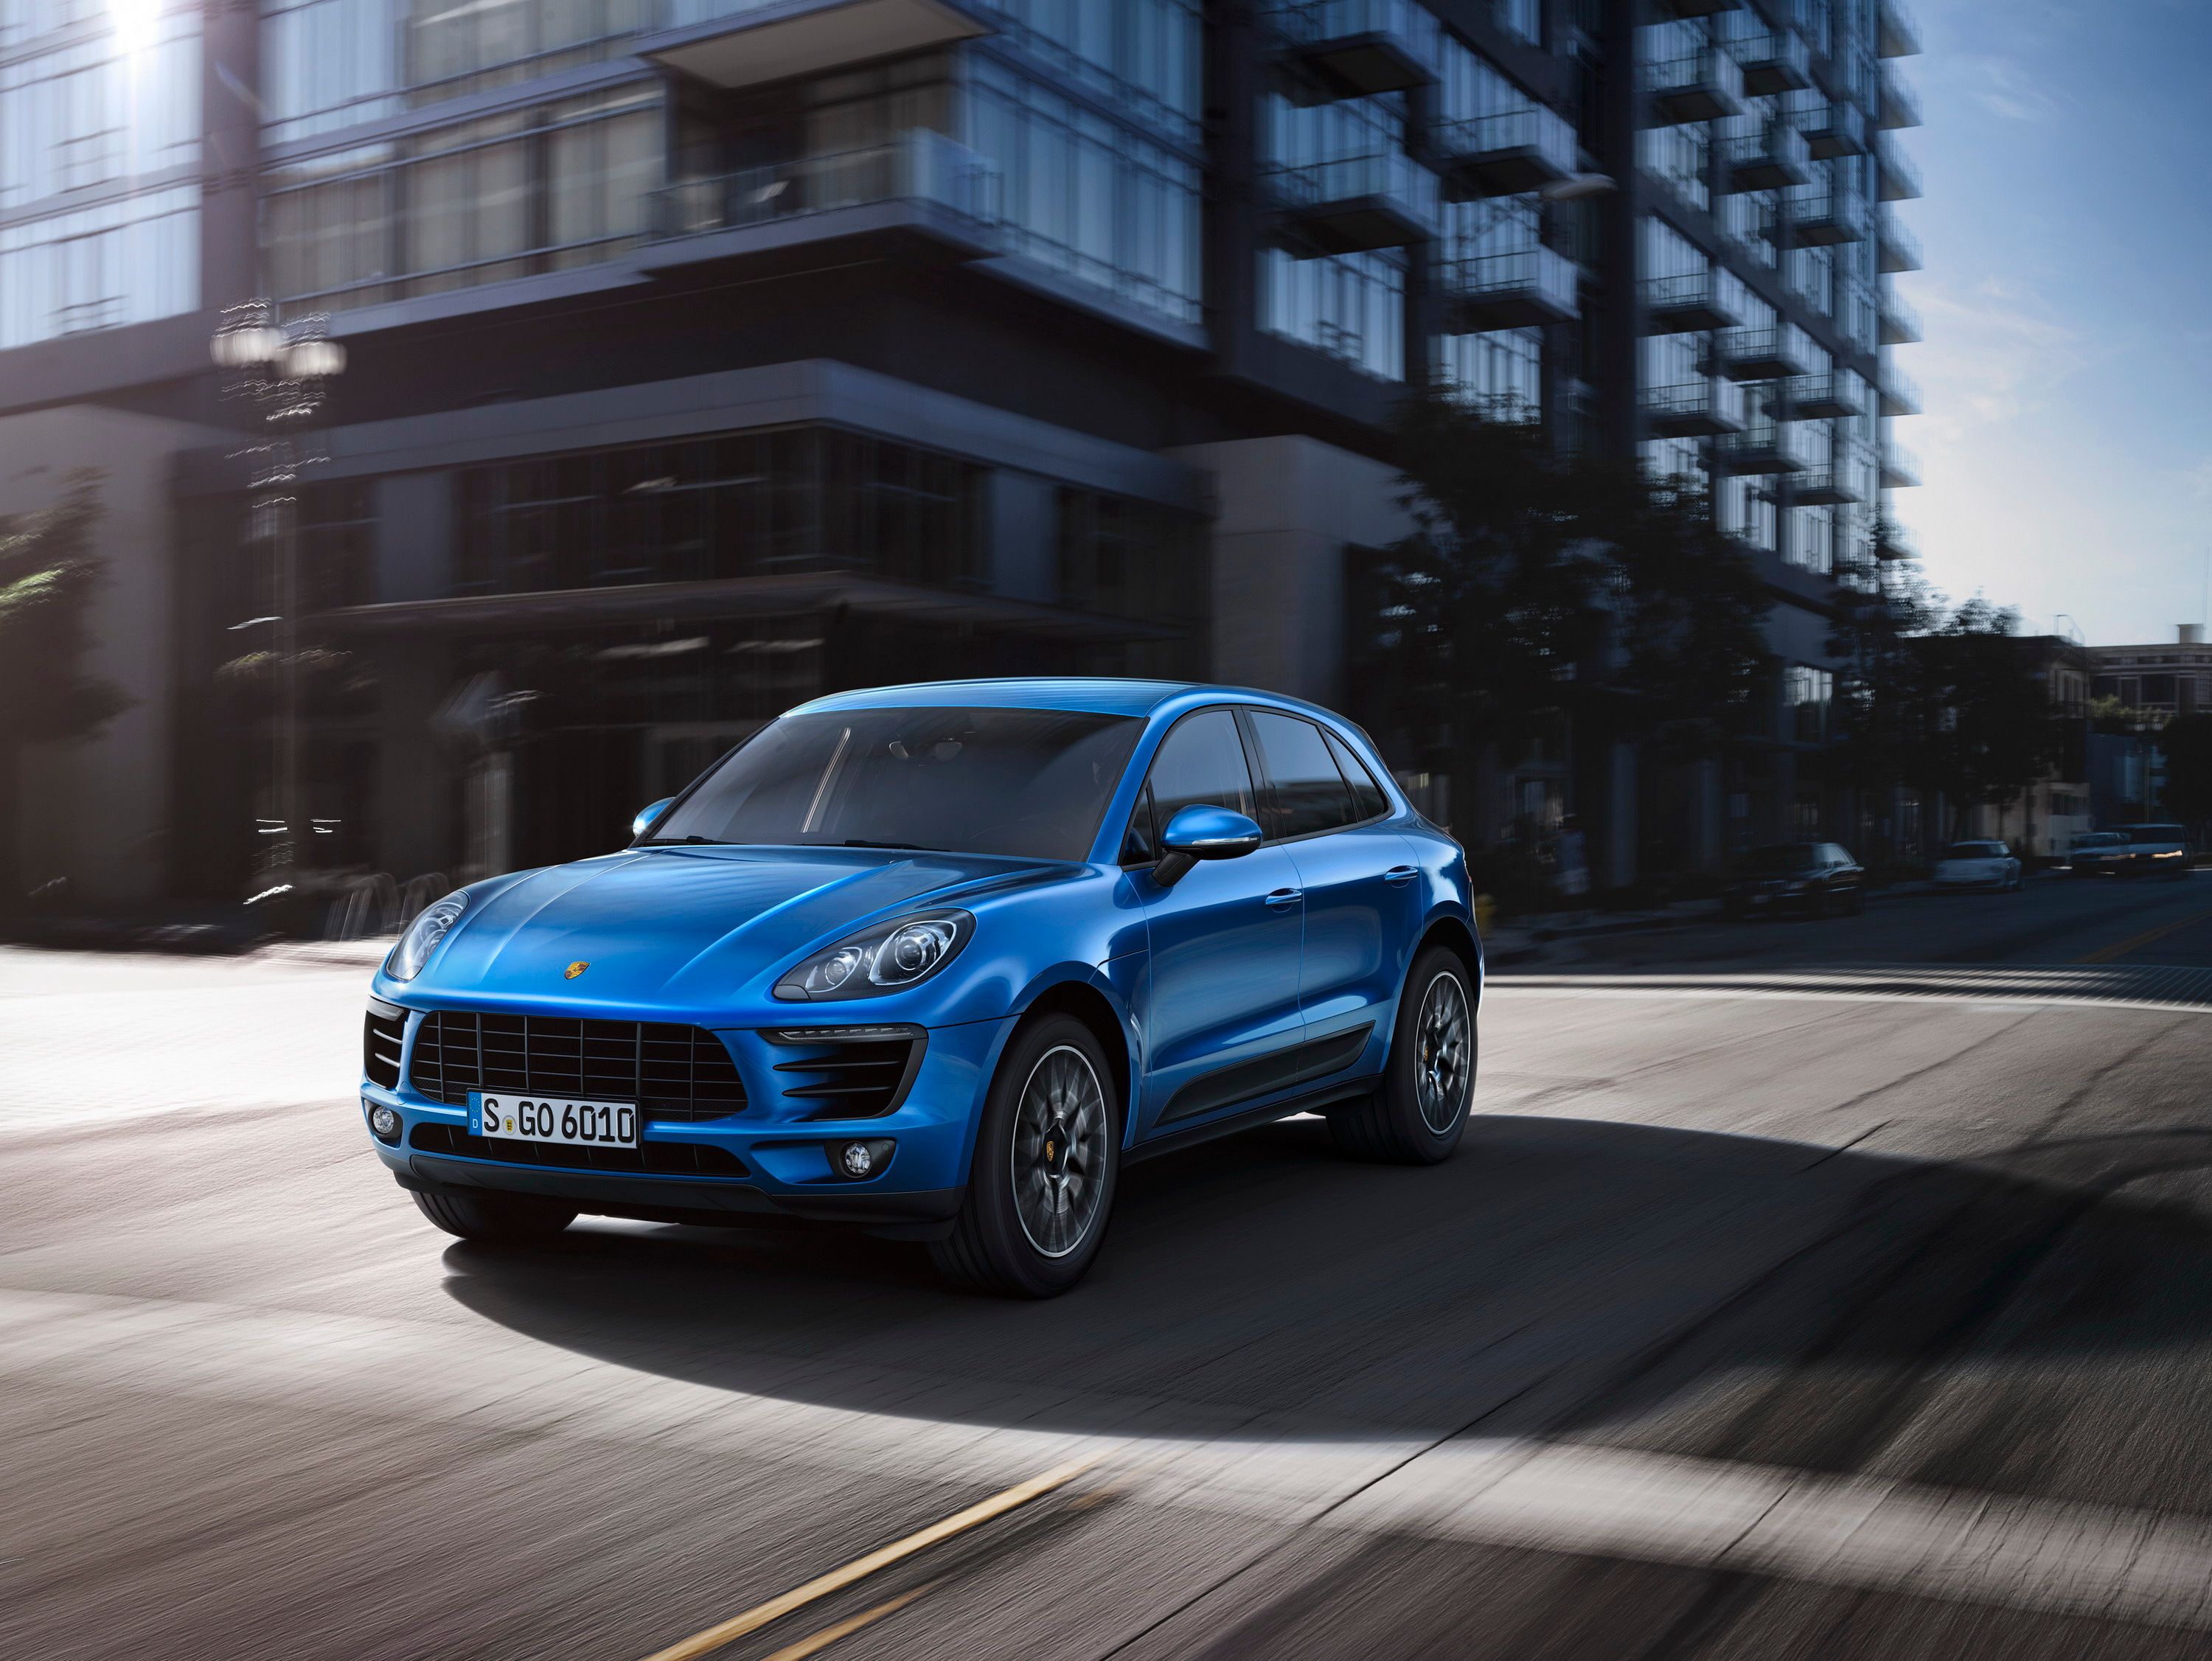 The Porsche Macan will be a major competitor